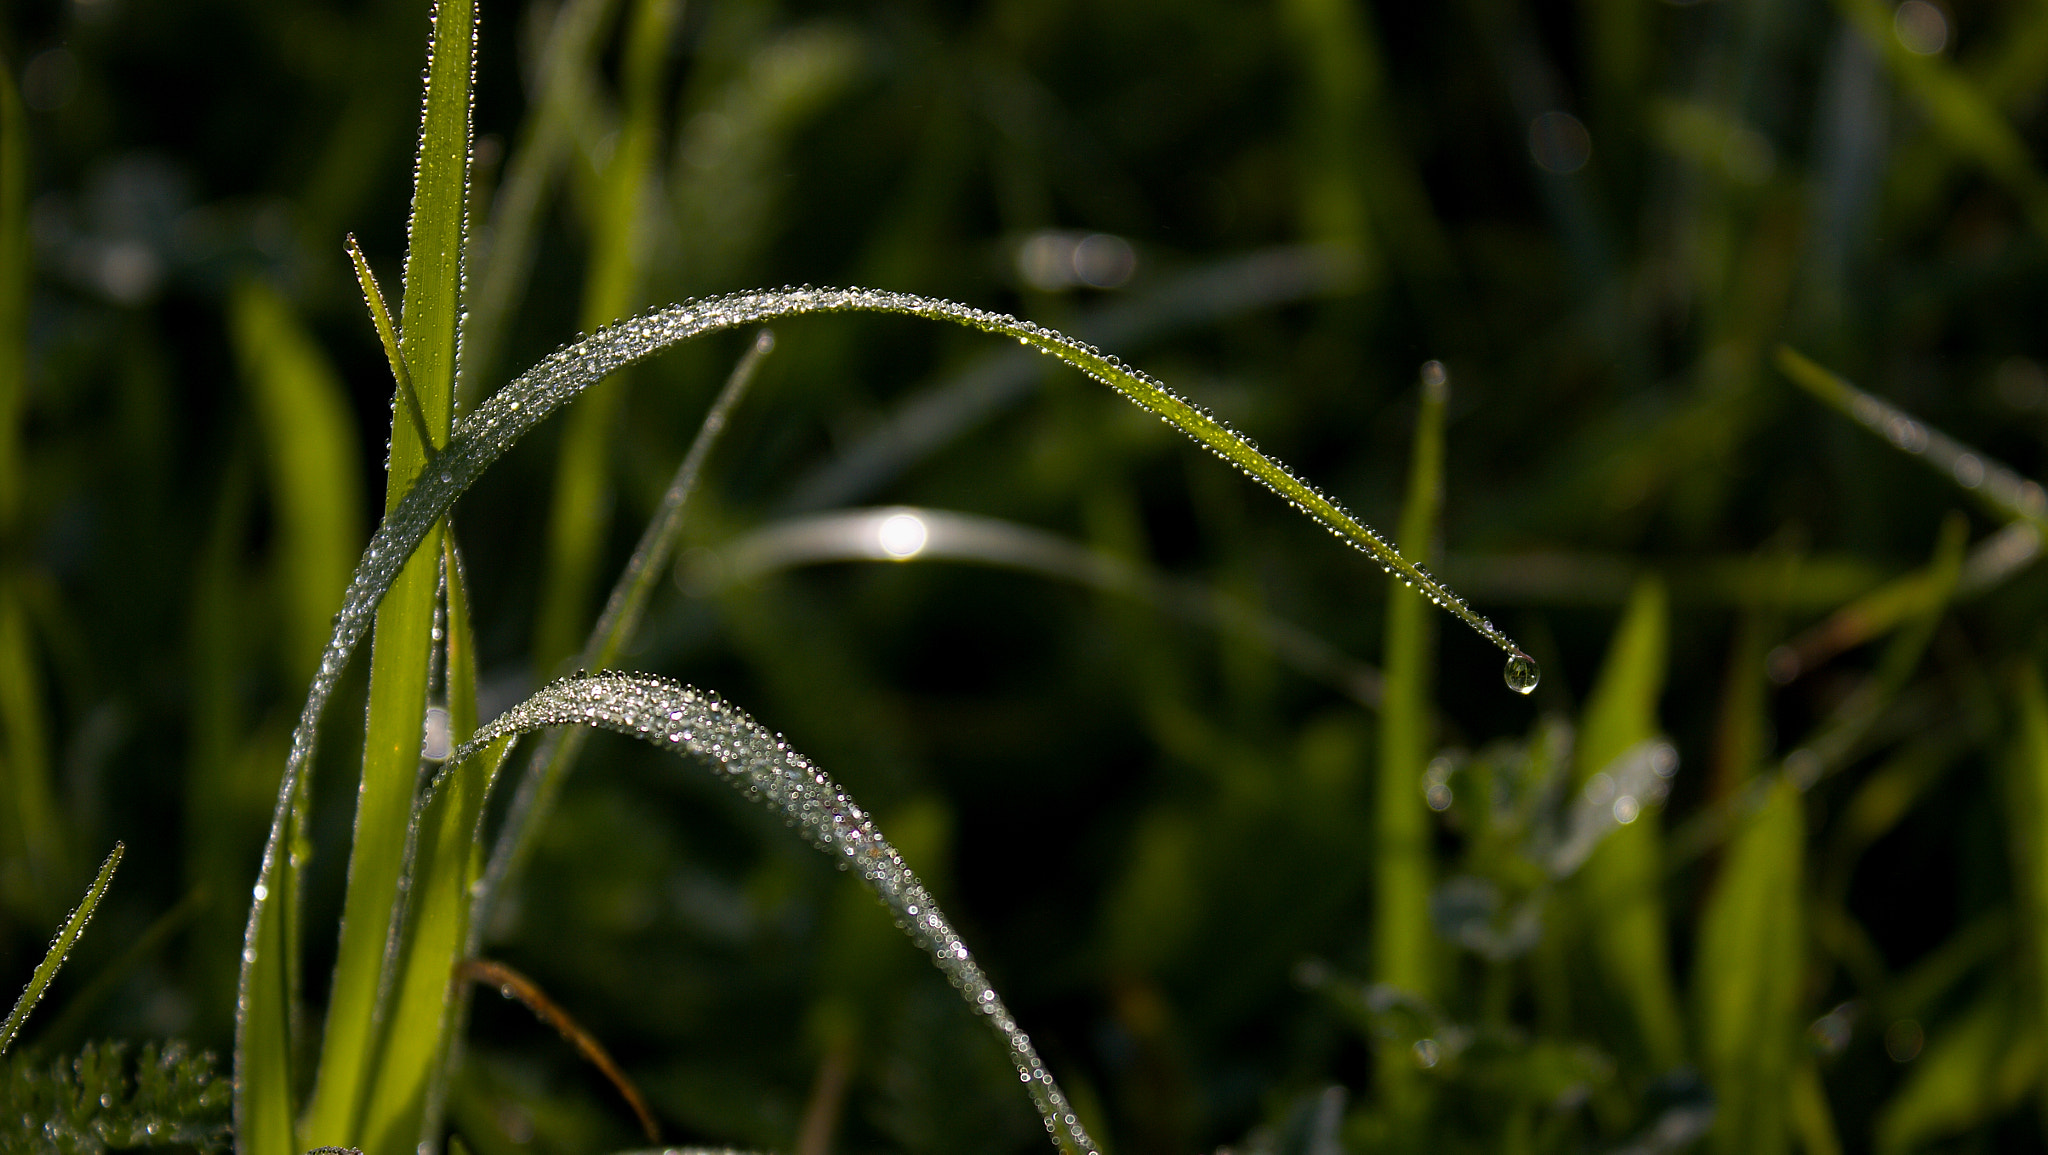 18.00 - 55.00 mm sample photo. Morning dew in sunlight photography